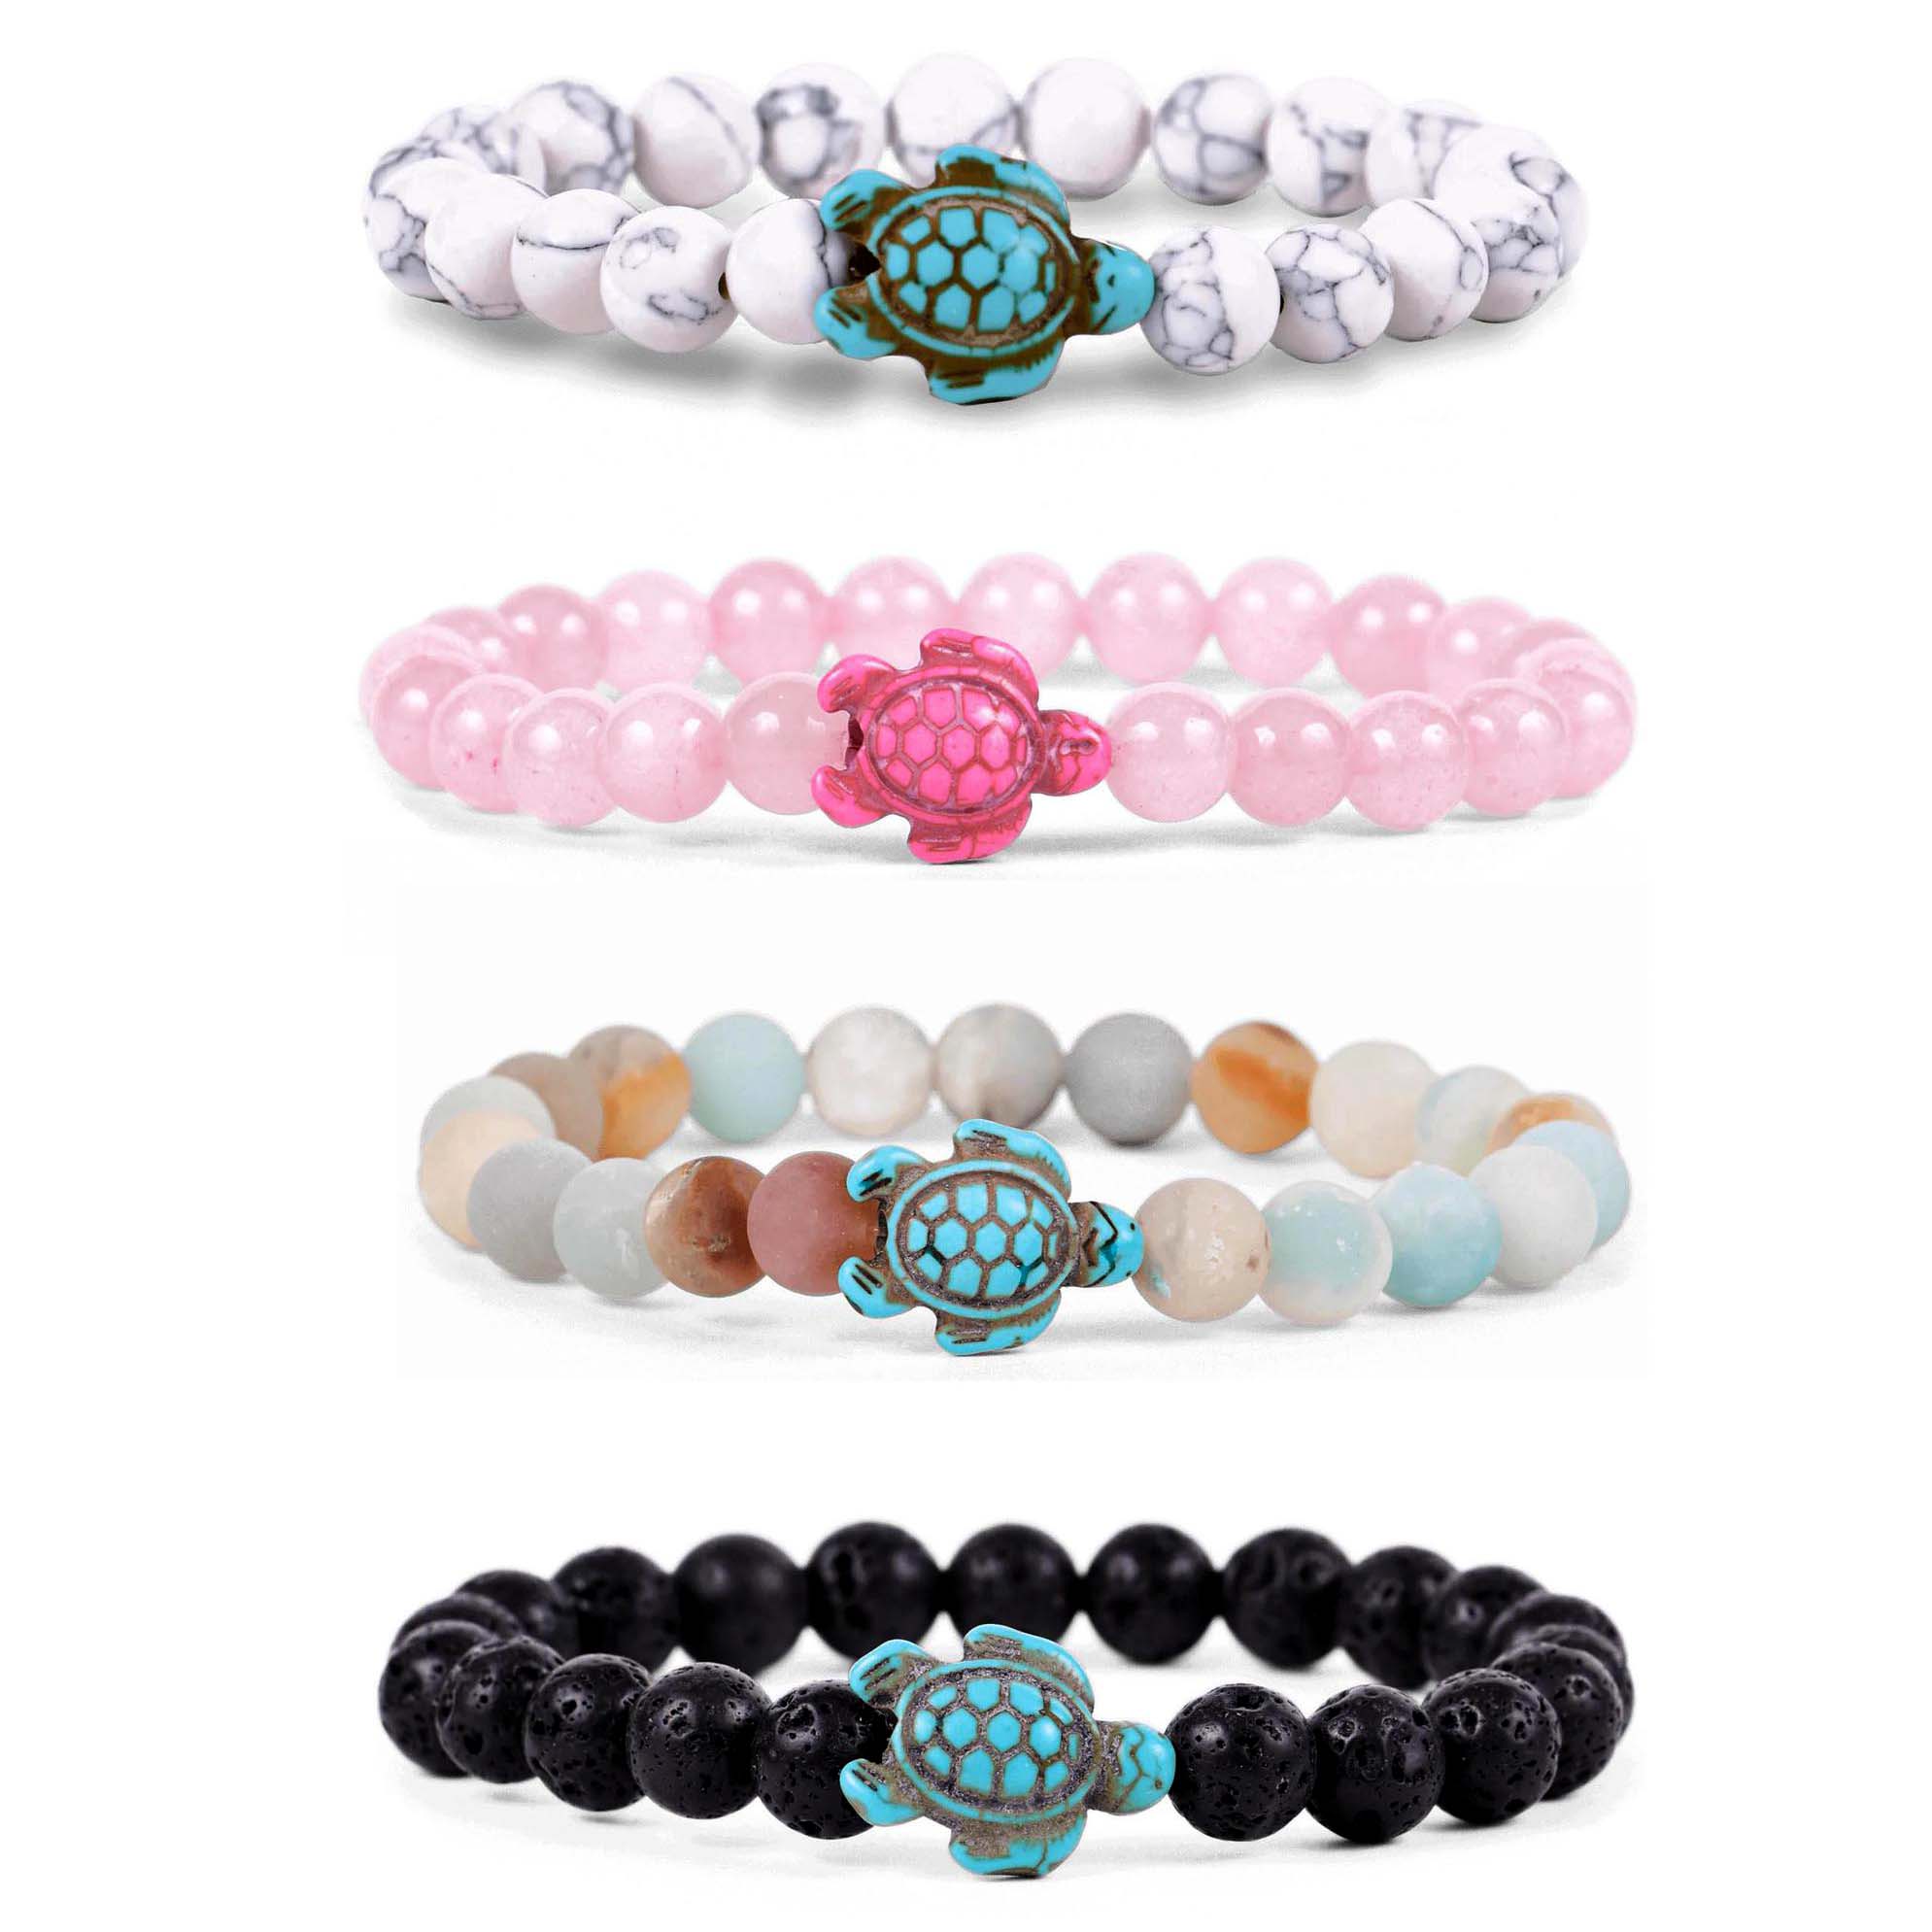 4 Fahlo SEA TURTLE Bracelets in deferent designs all featuring a cure turtle.